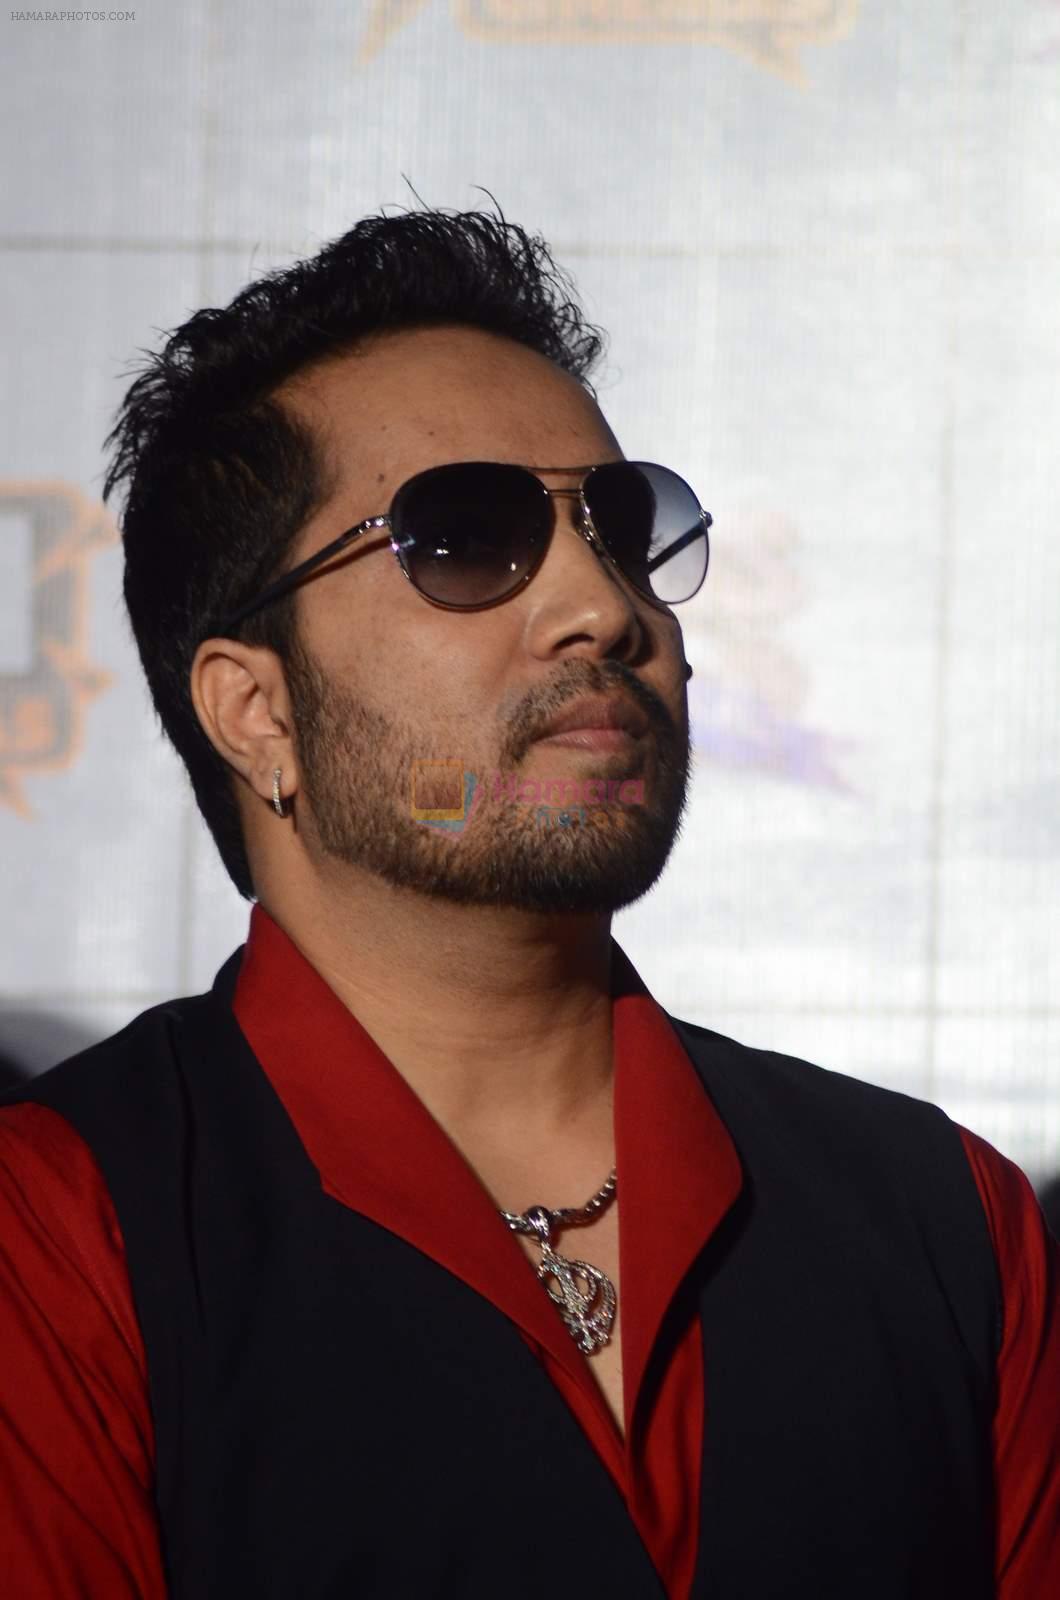 Mika Singh at Welcome Back title song launch in Mumbai on 8th Aug 2015